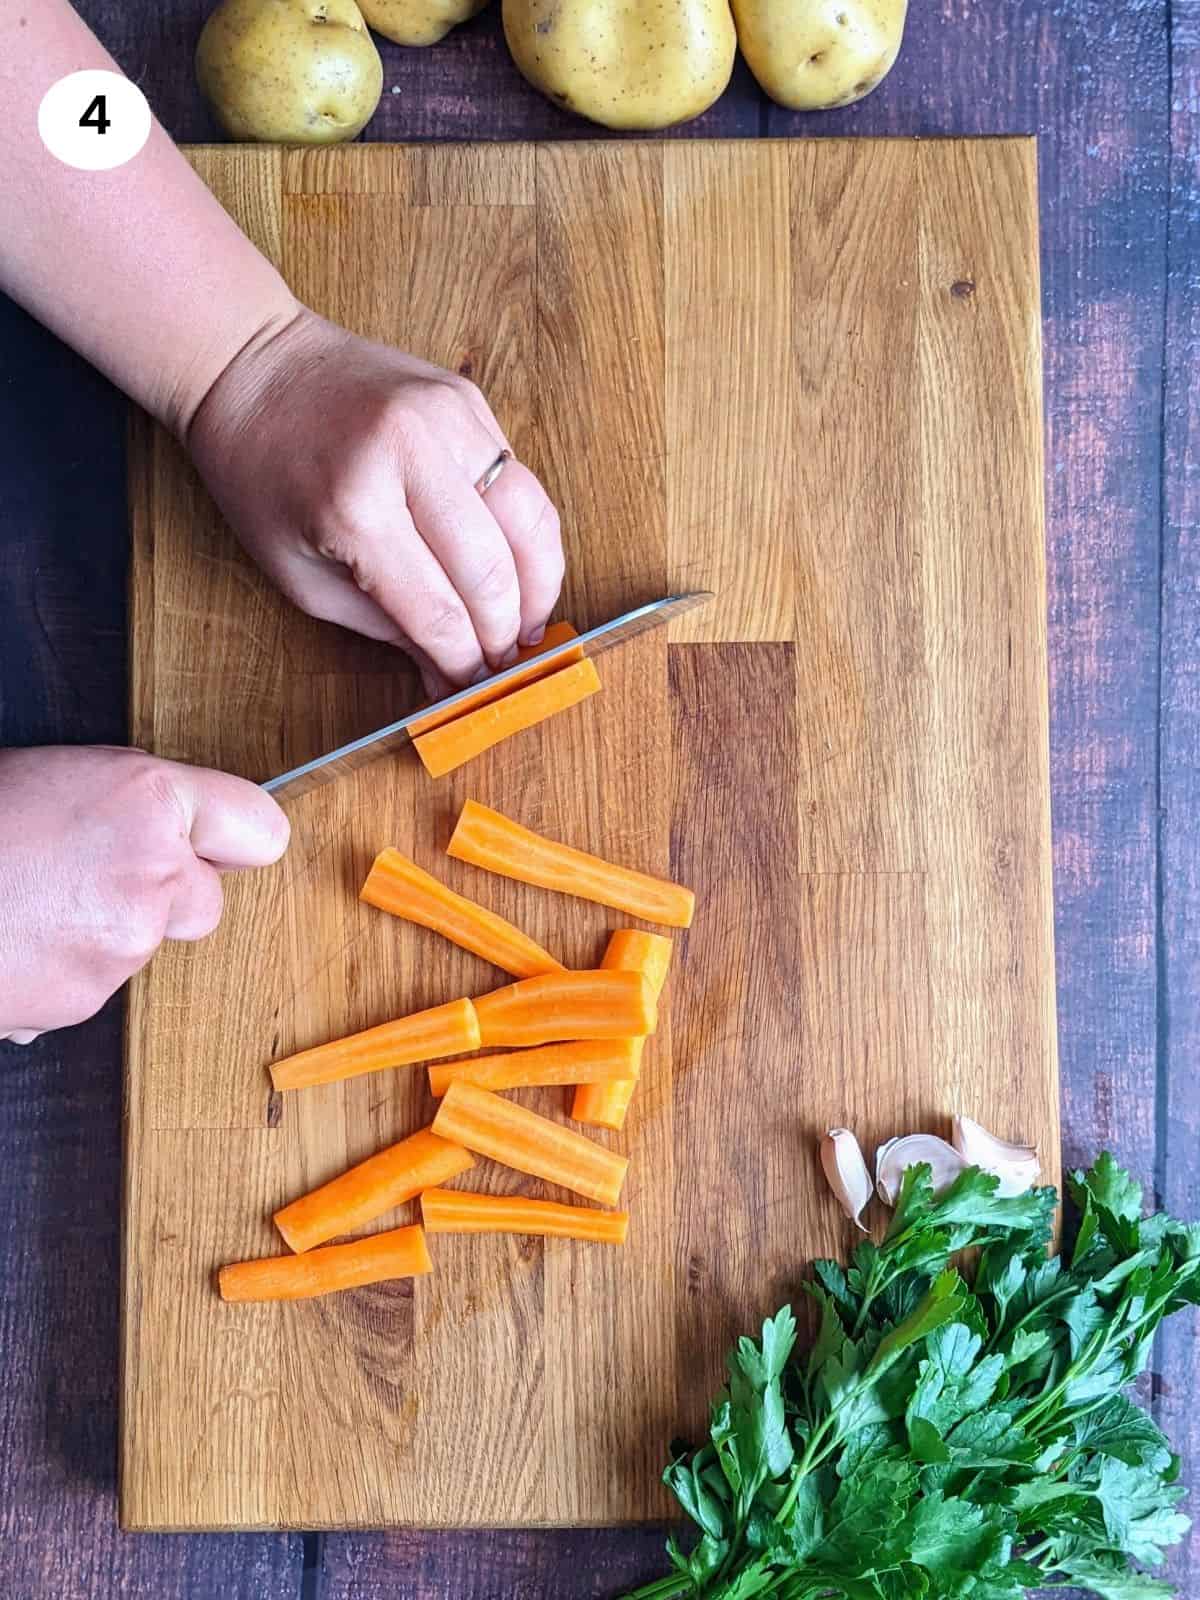 Cutting the carrots into sticks.